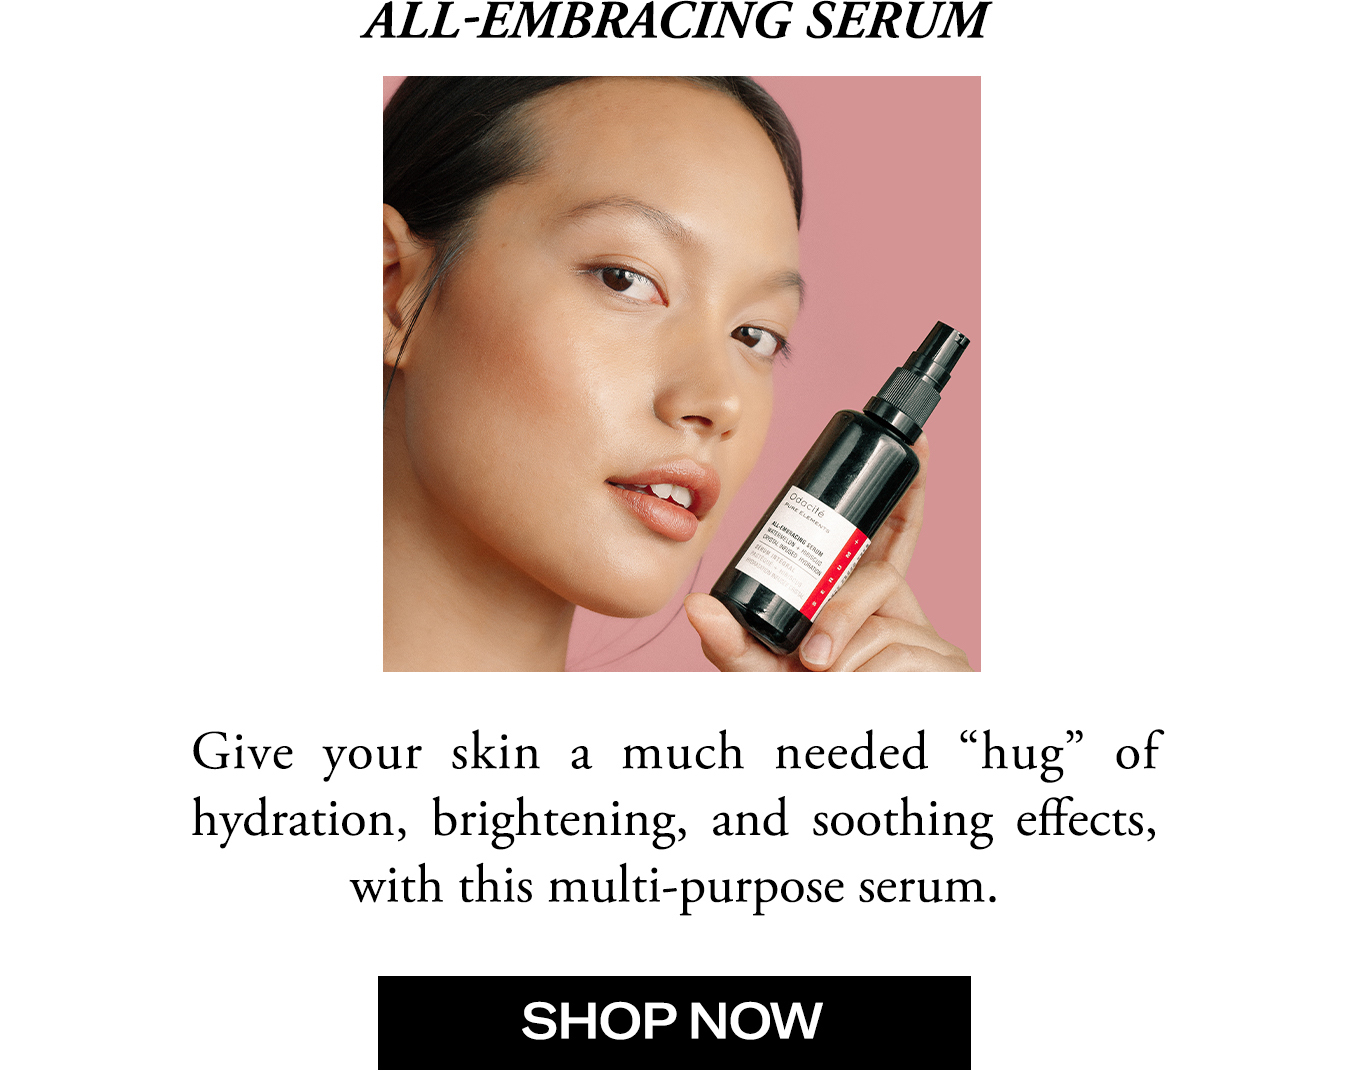 Shop Our All-Embracing Serum